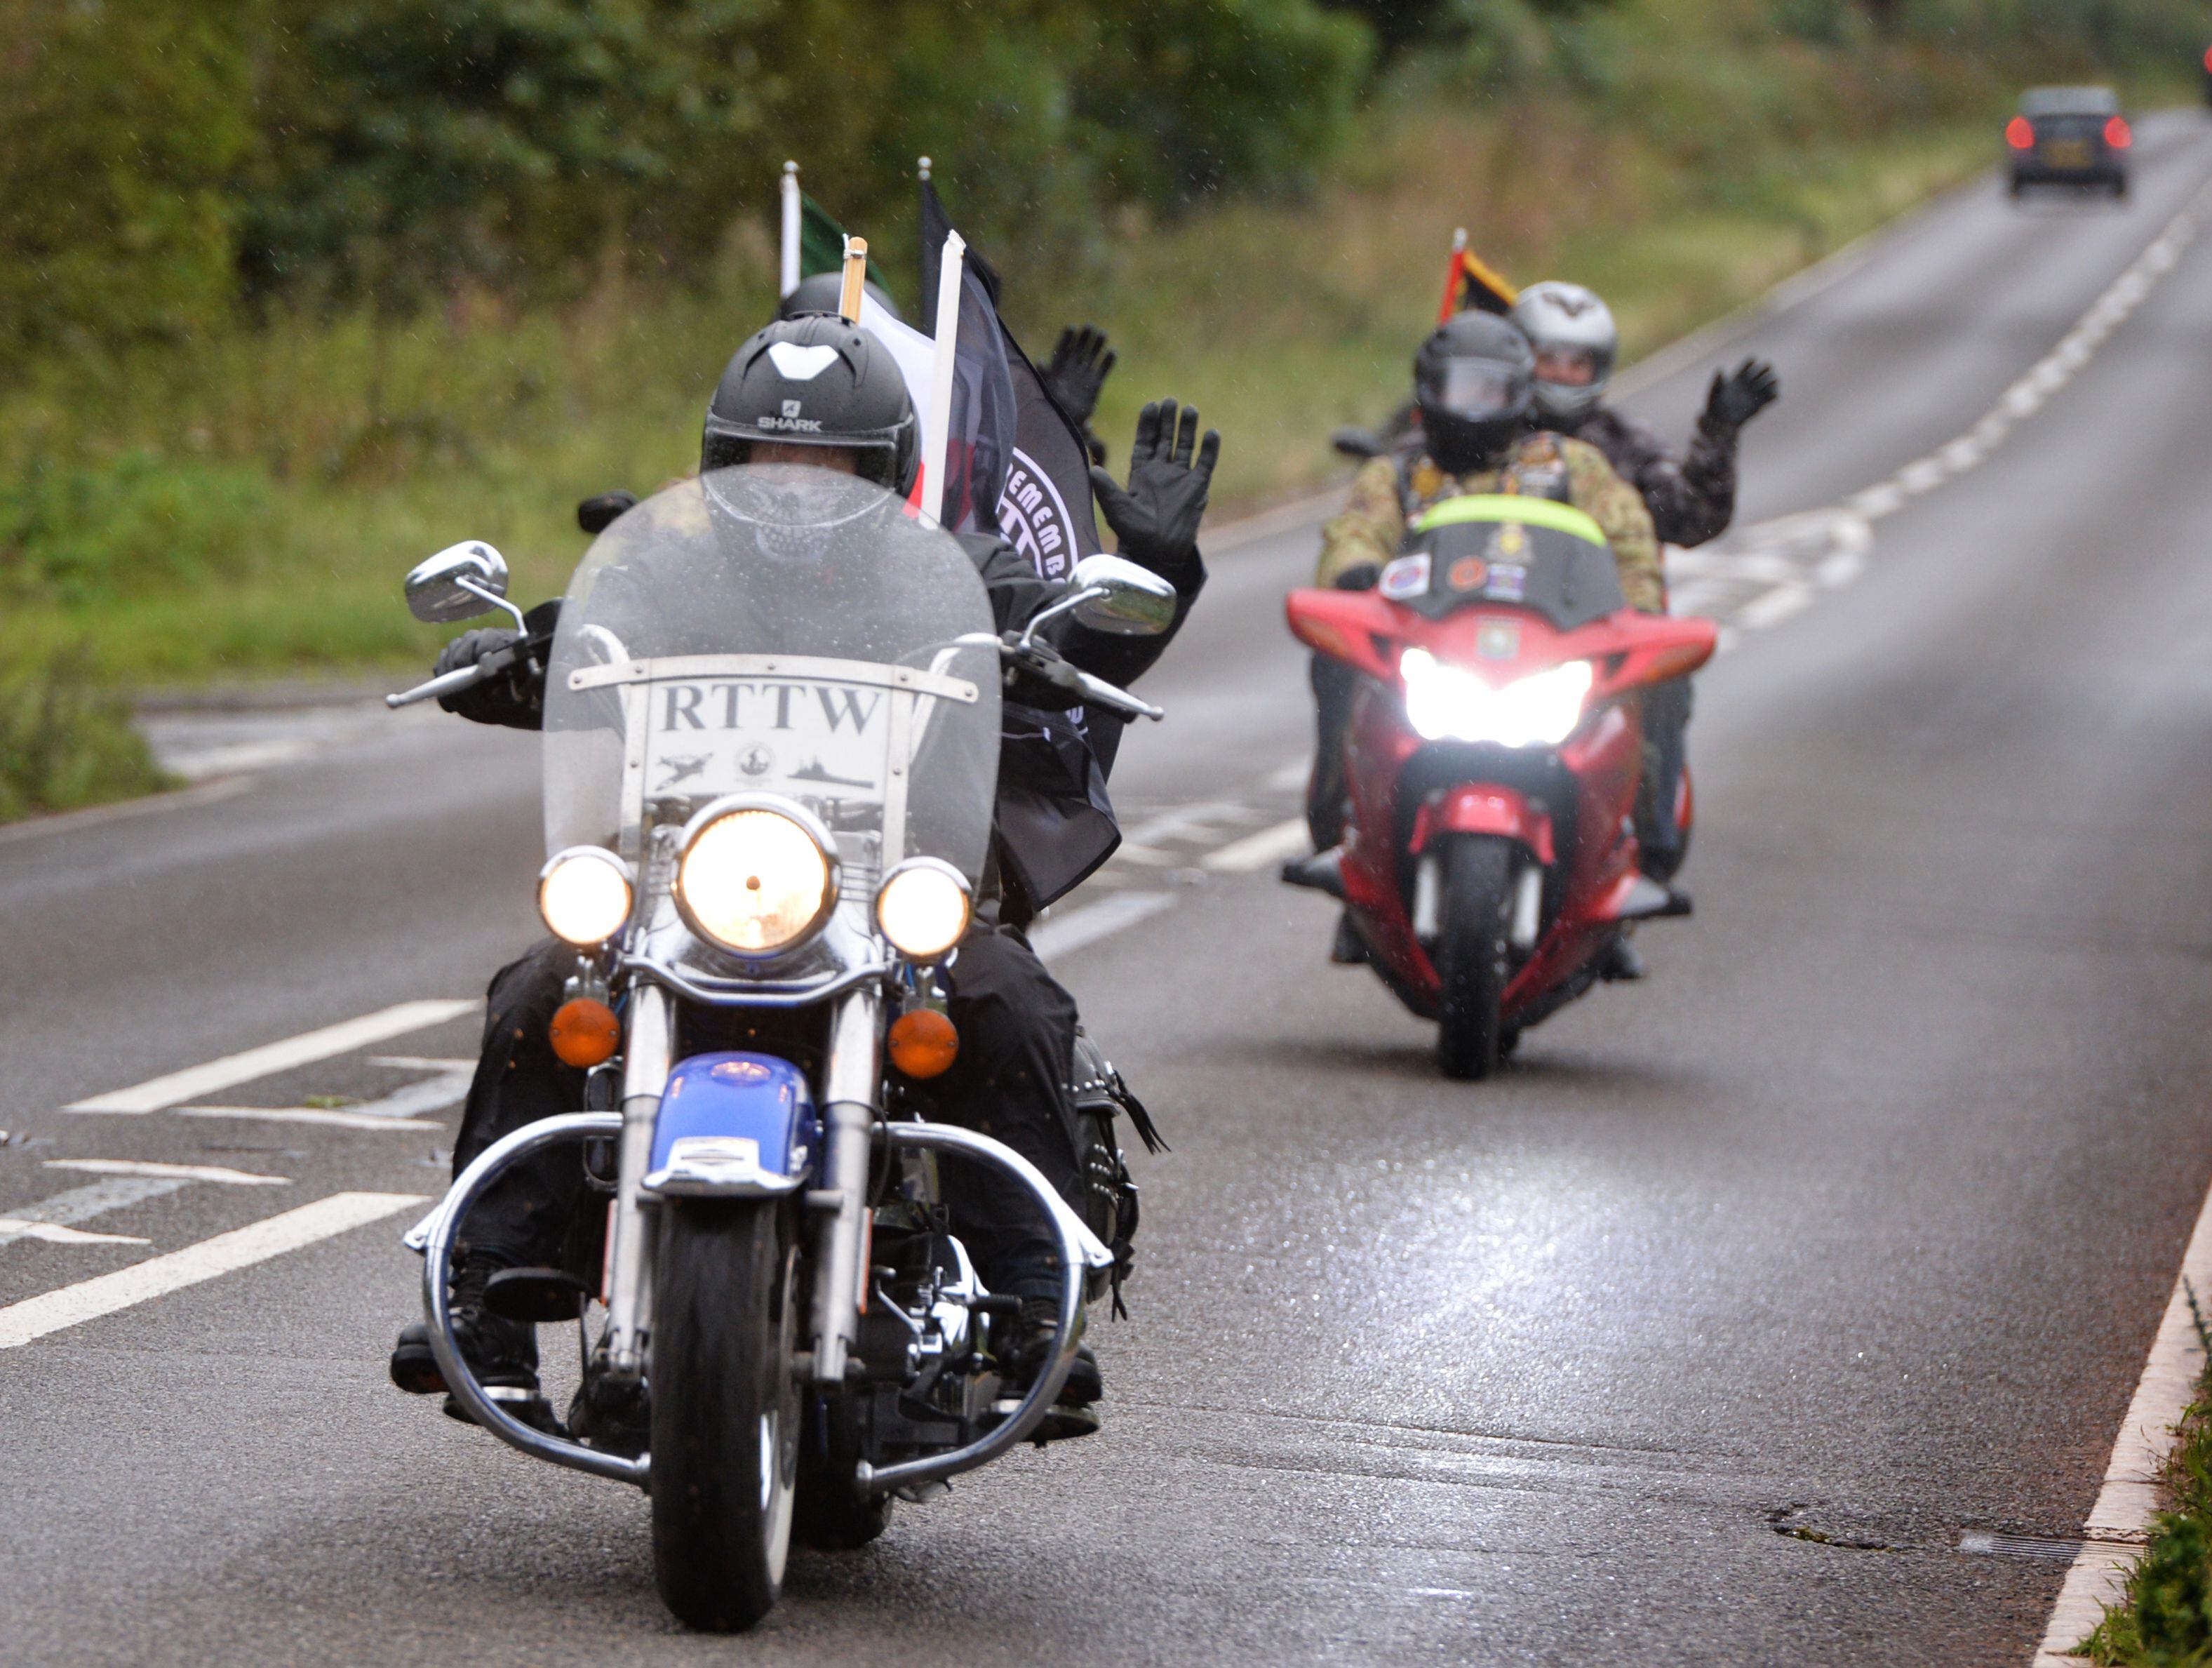 Full schedule and route info for tomorrow's Ride to the Wall motorcycle event